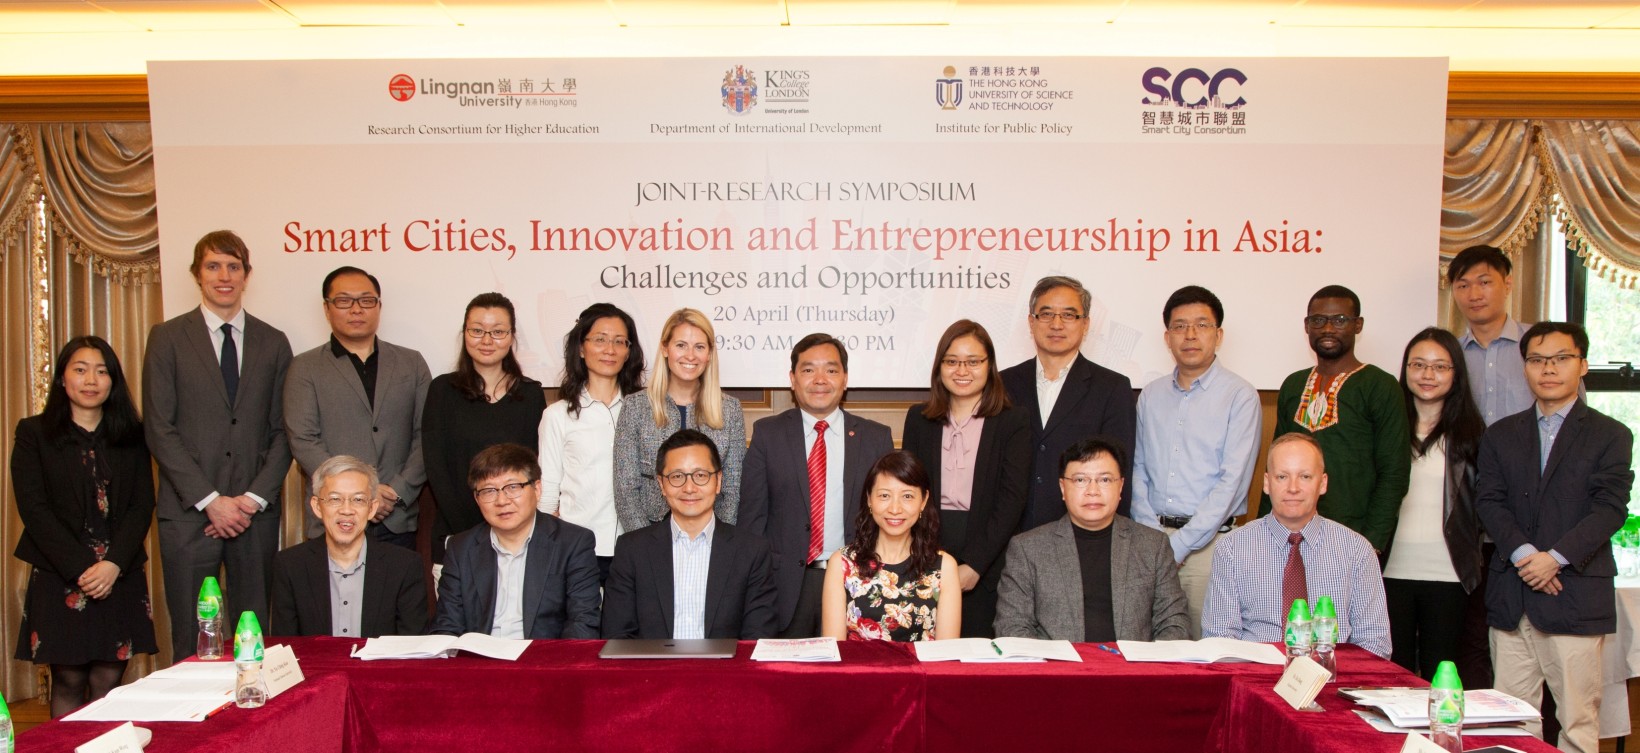 Lingnan University co-hosts Research Symposium on Smart Cities, Innovation and Entrepreneurship in Asia